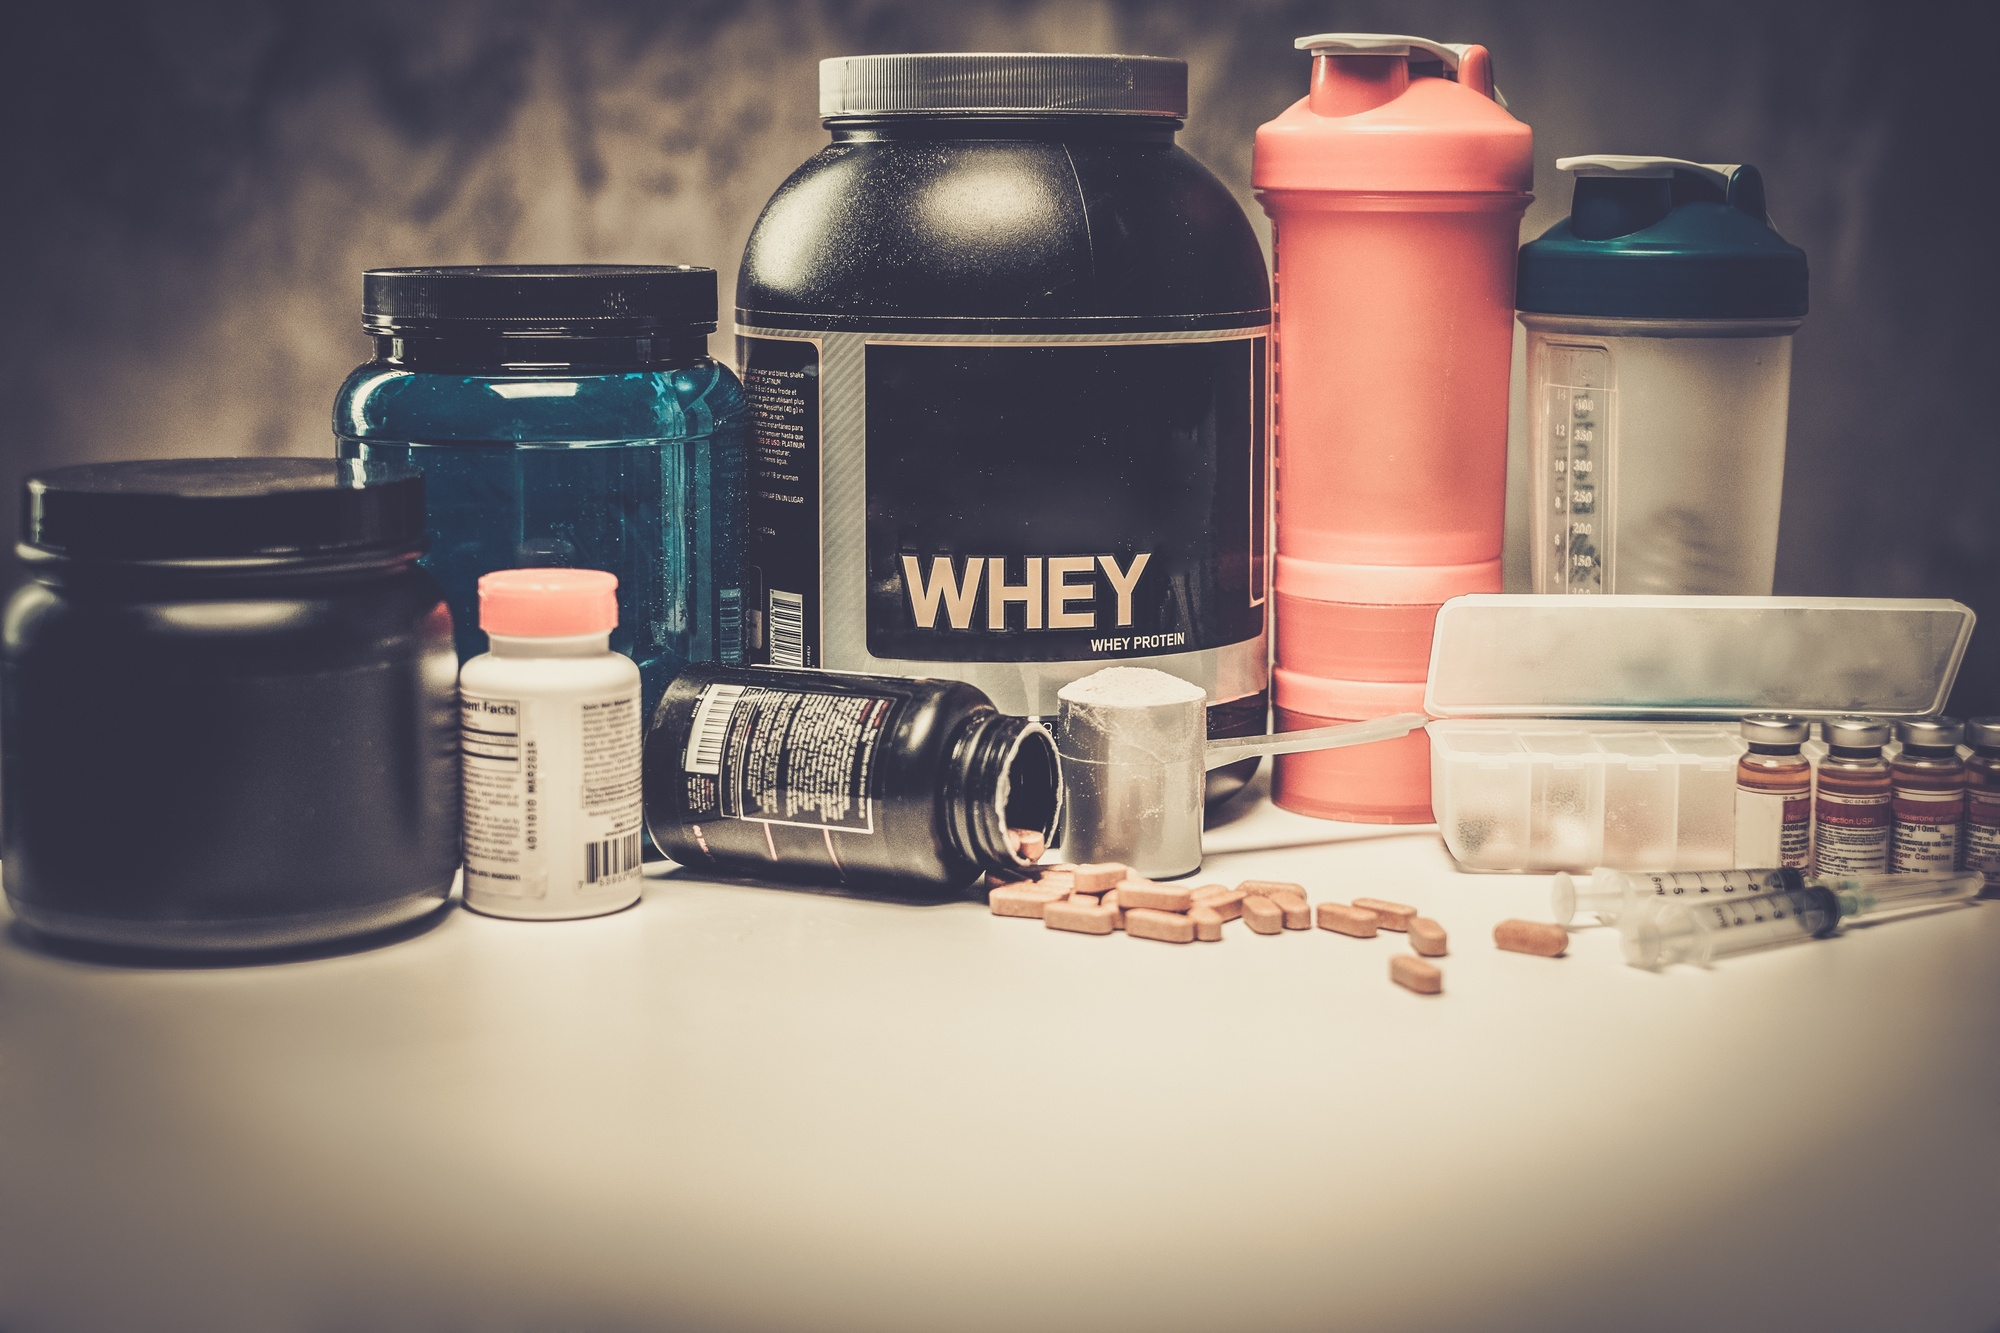 8 Questions To Ask When Finding The Best Supplement Manufacturer